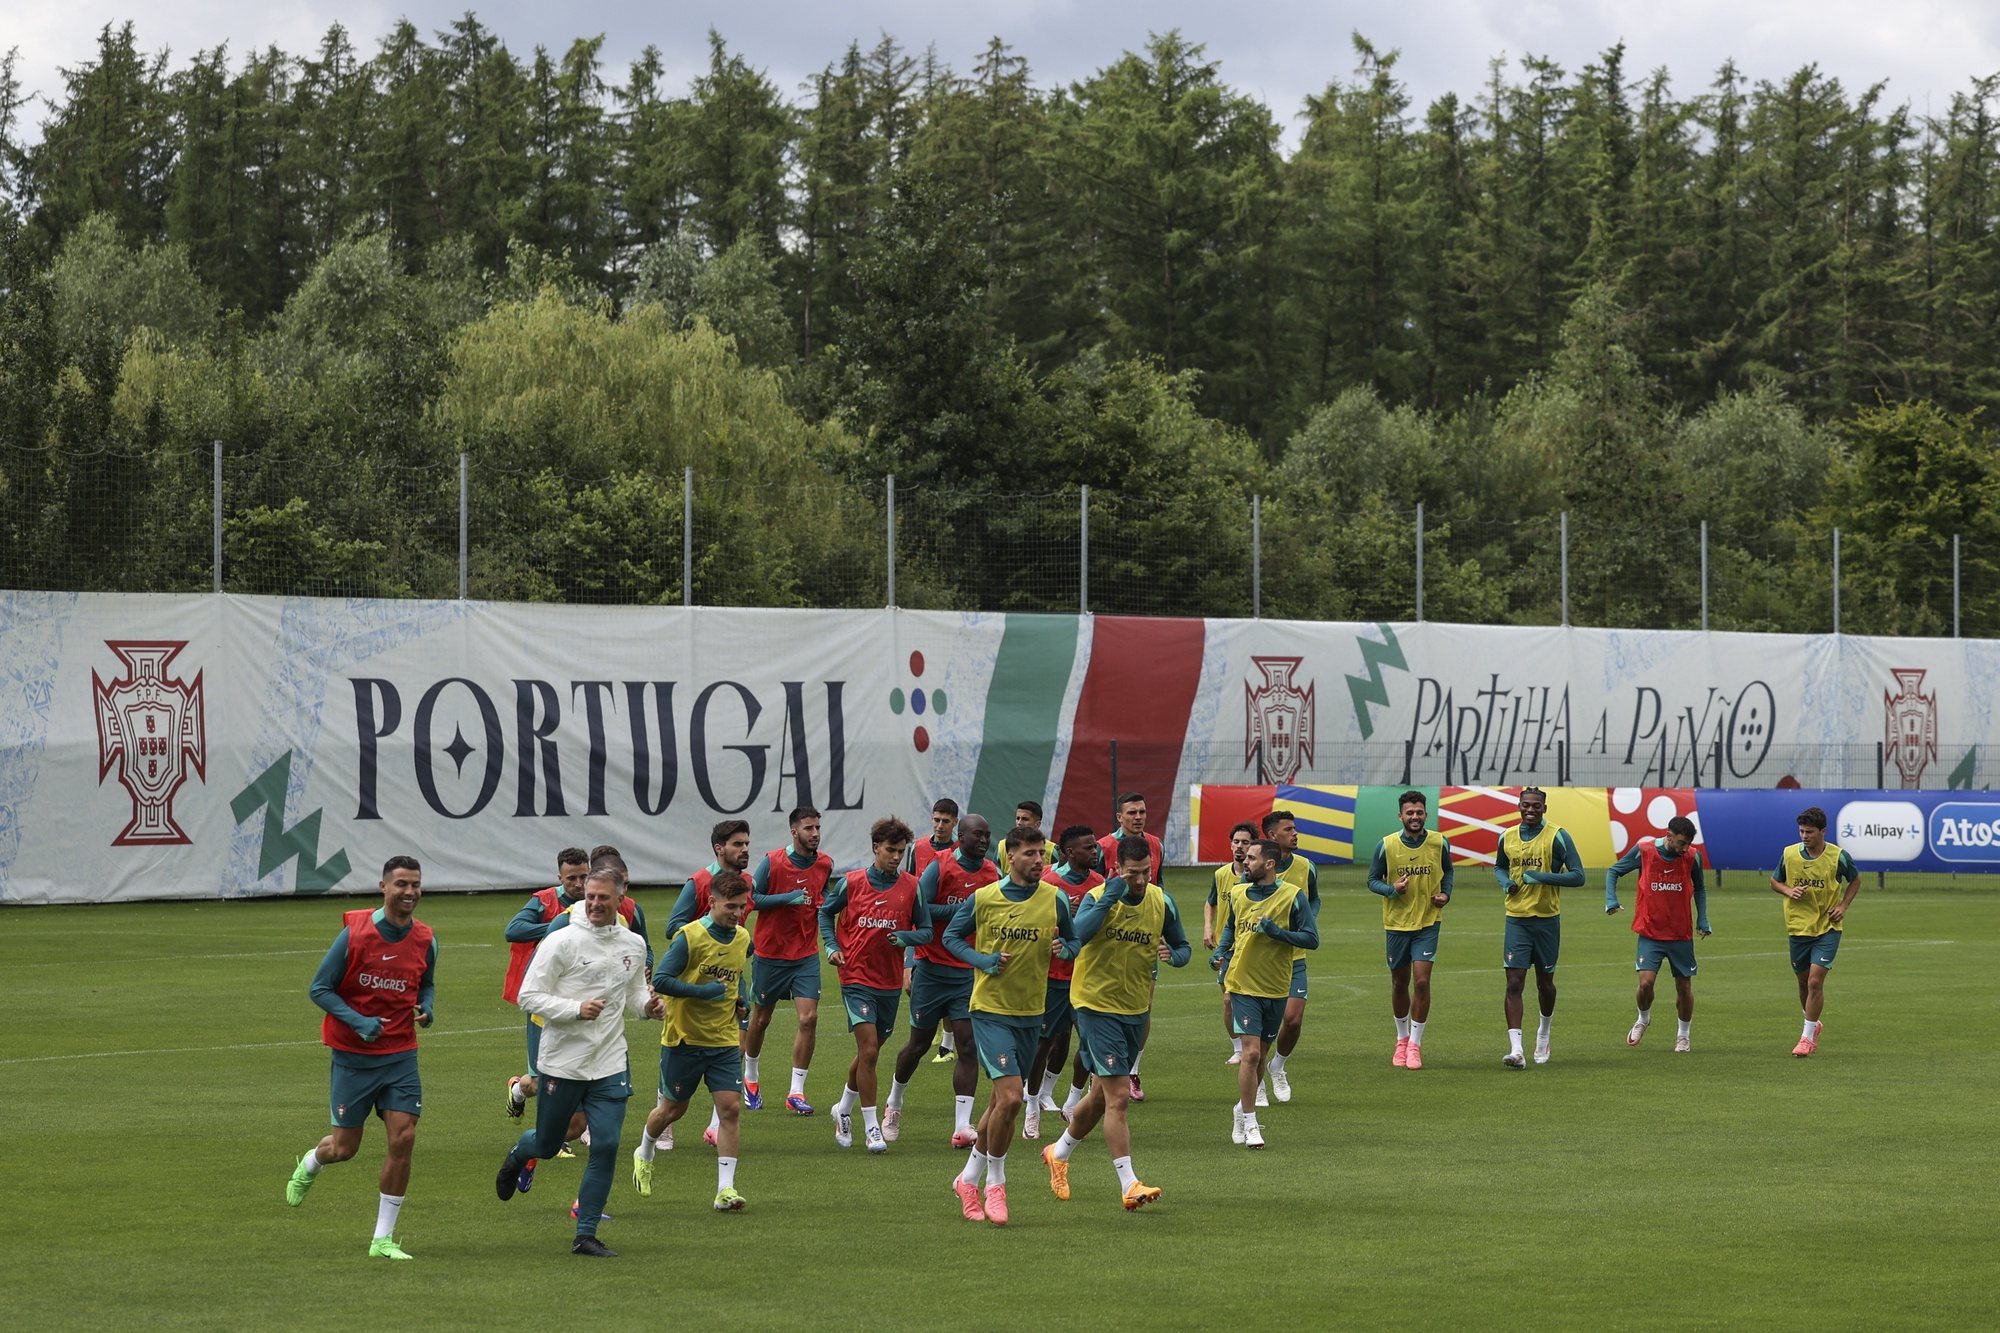 Portugal national soccer team players during a training session in Marienfeld, Harsewinkel, Germany, 15 June 2024. The Portuguese national soccer team is based in Marienfeld, Harsewinkel during the UEFA EURO 2024. MIGUEL A. LOPES/LUSA